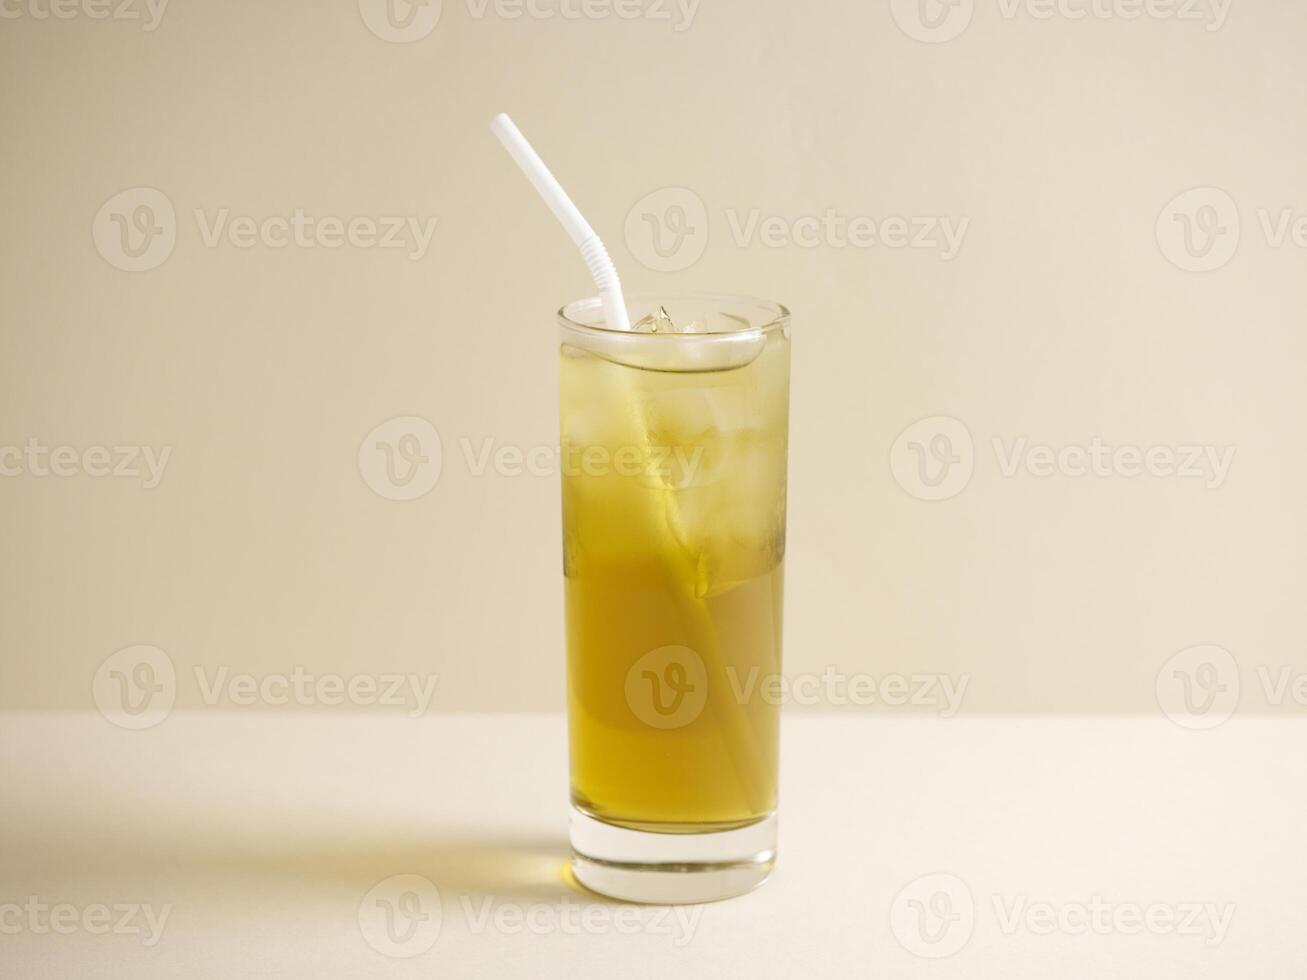 A glass of Watercress Honey Lemon Drink with straw isolated on grey background side view photo